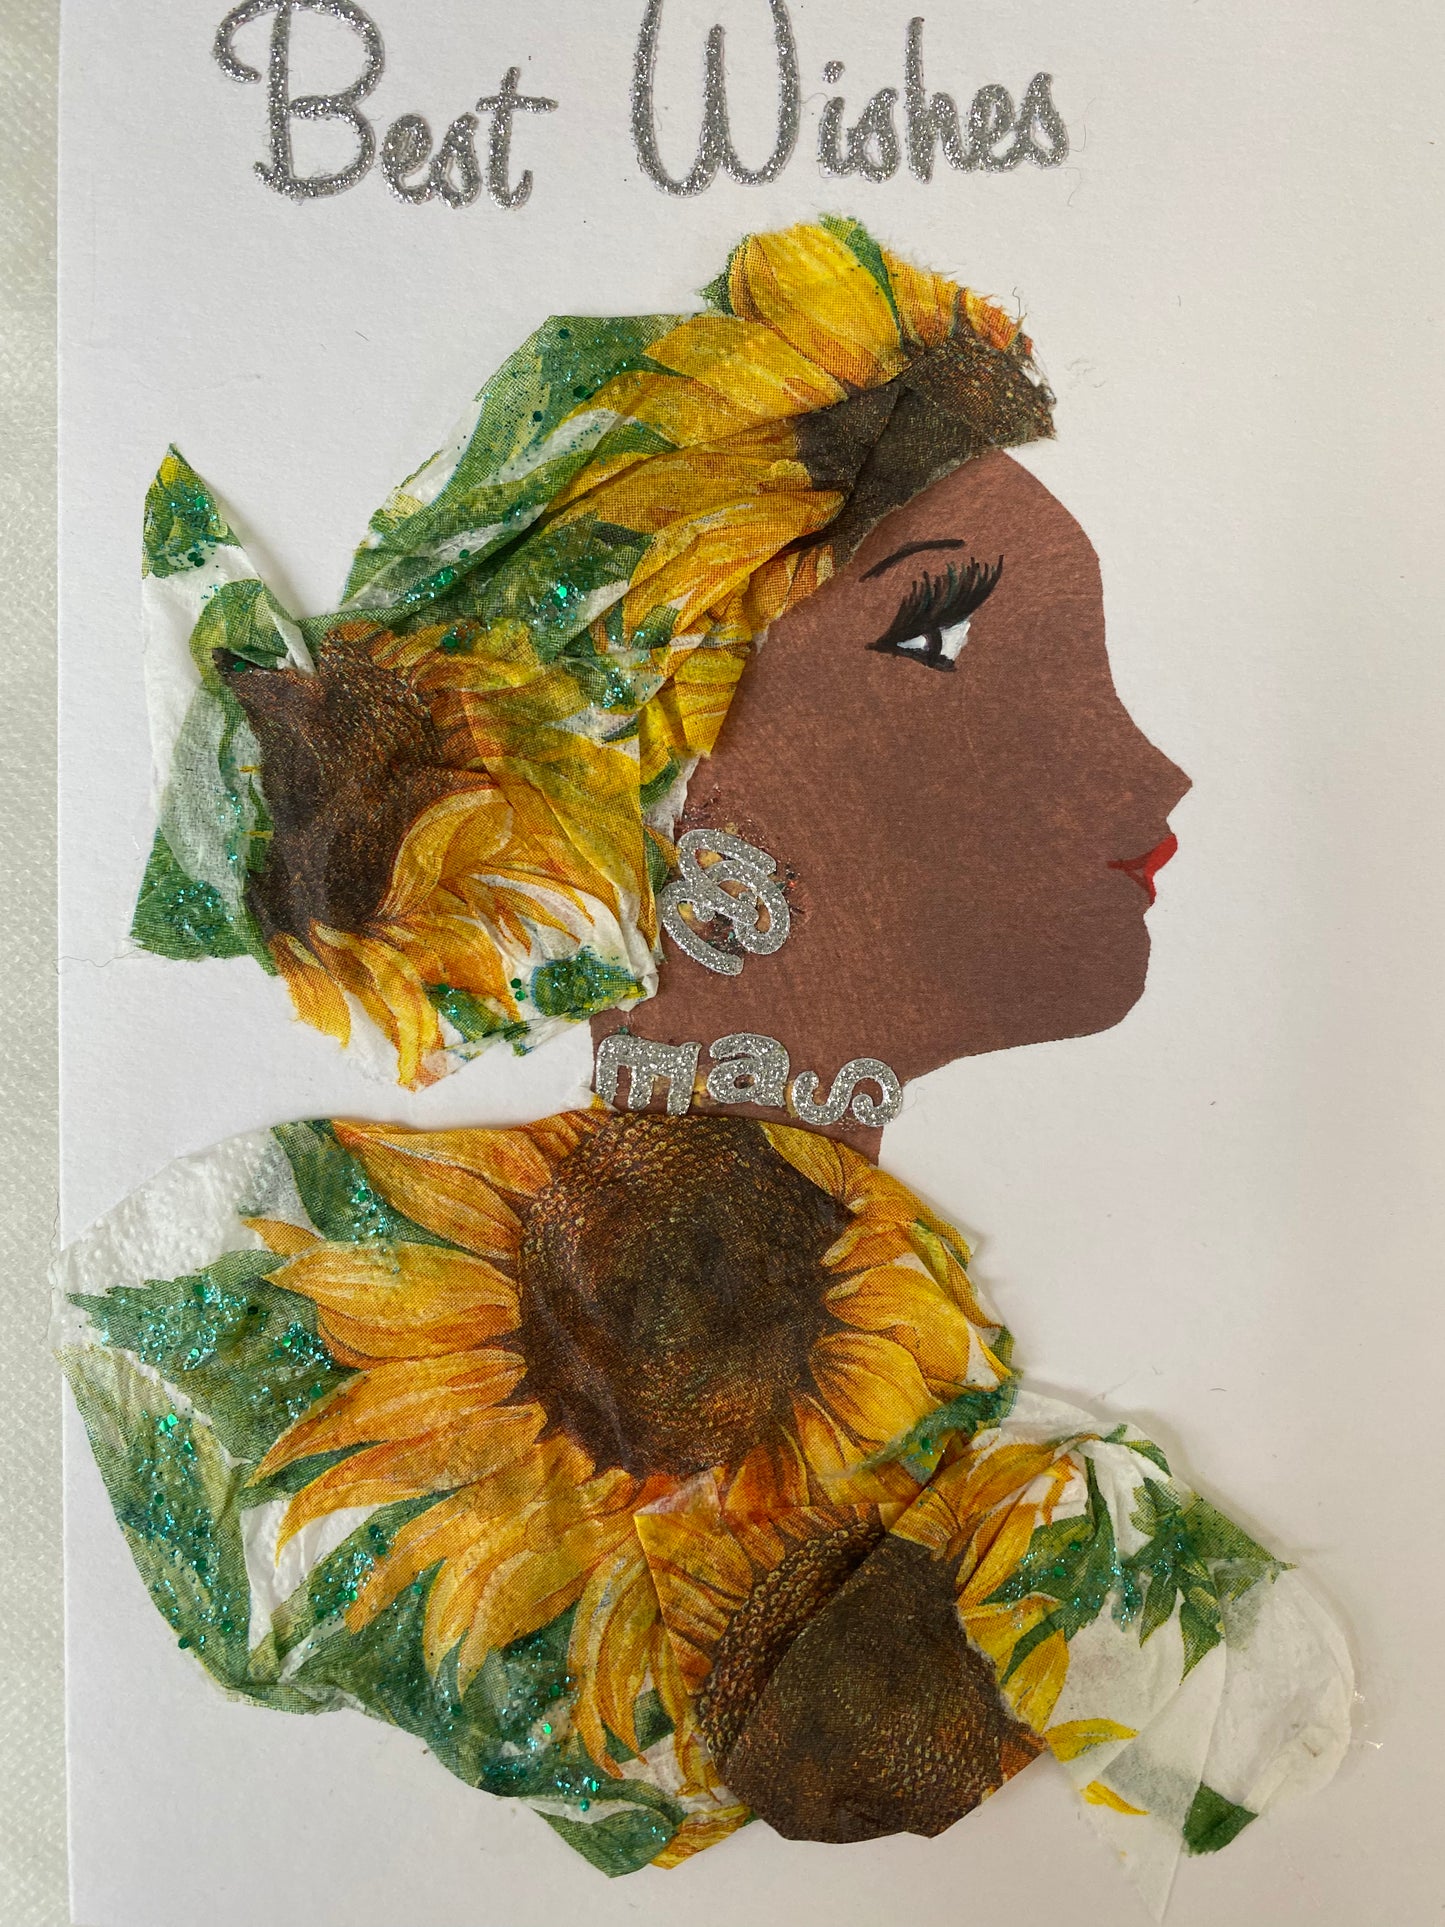 I have designed this card of a woman named Sophisticated Sunflower. She has a brown skin tone and wears a beautiful hat with blooming flowers and a matching flower blouse. She wears her sparkly silver jewellery. On the top it says best wishes in silver.